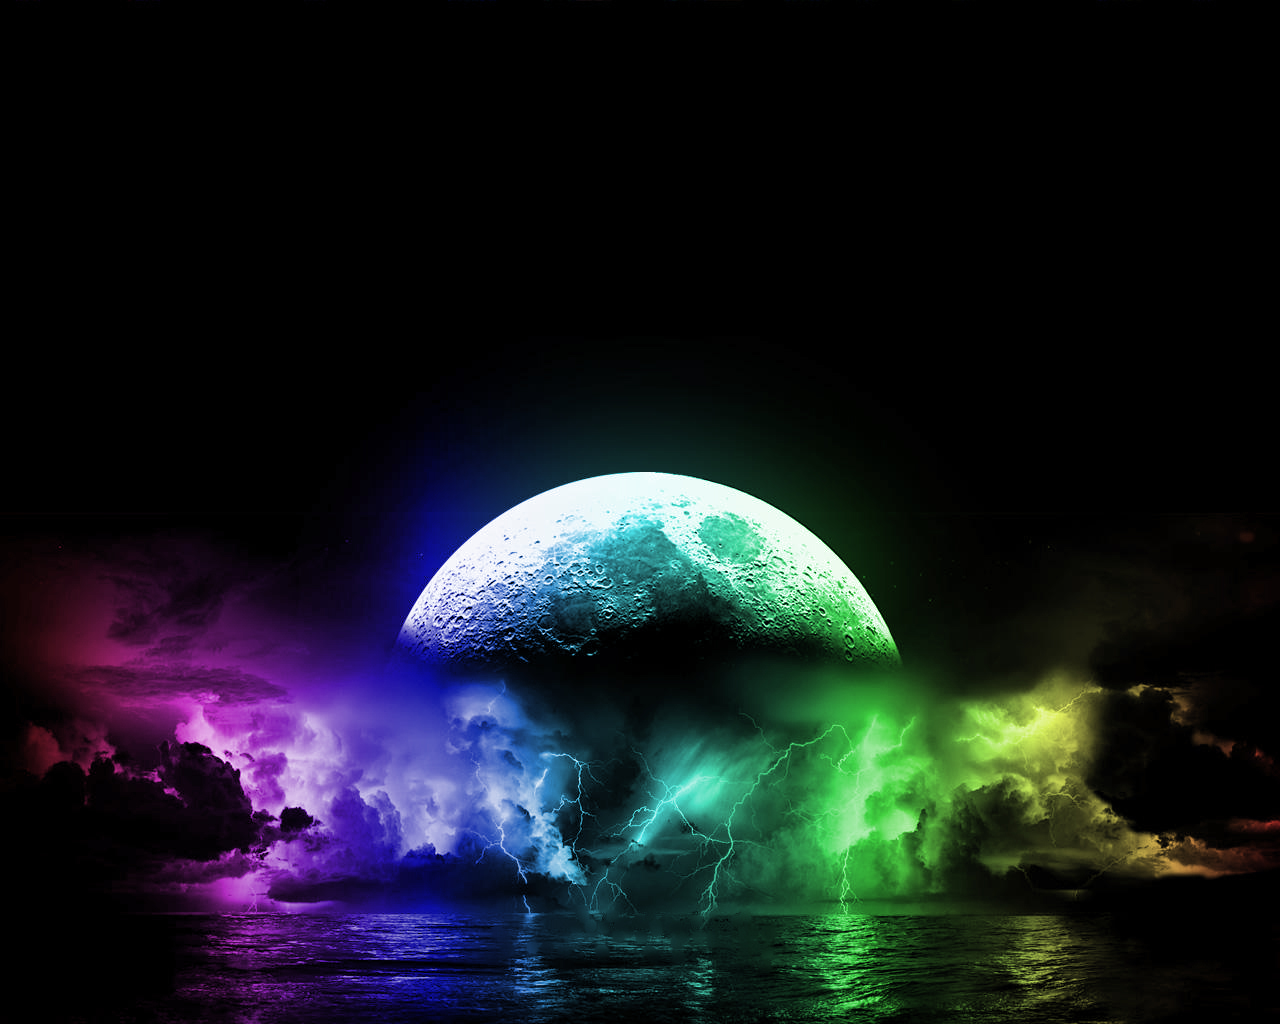 Cool wallpaper download wallpaper A really cool and colorful moon